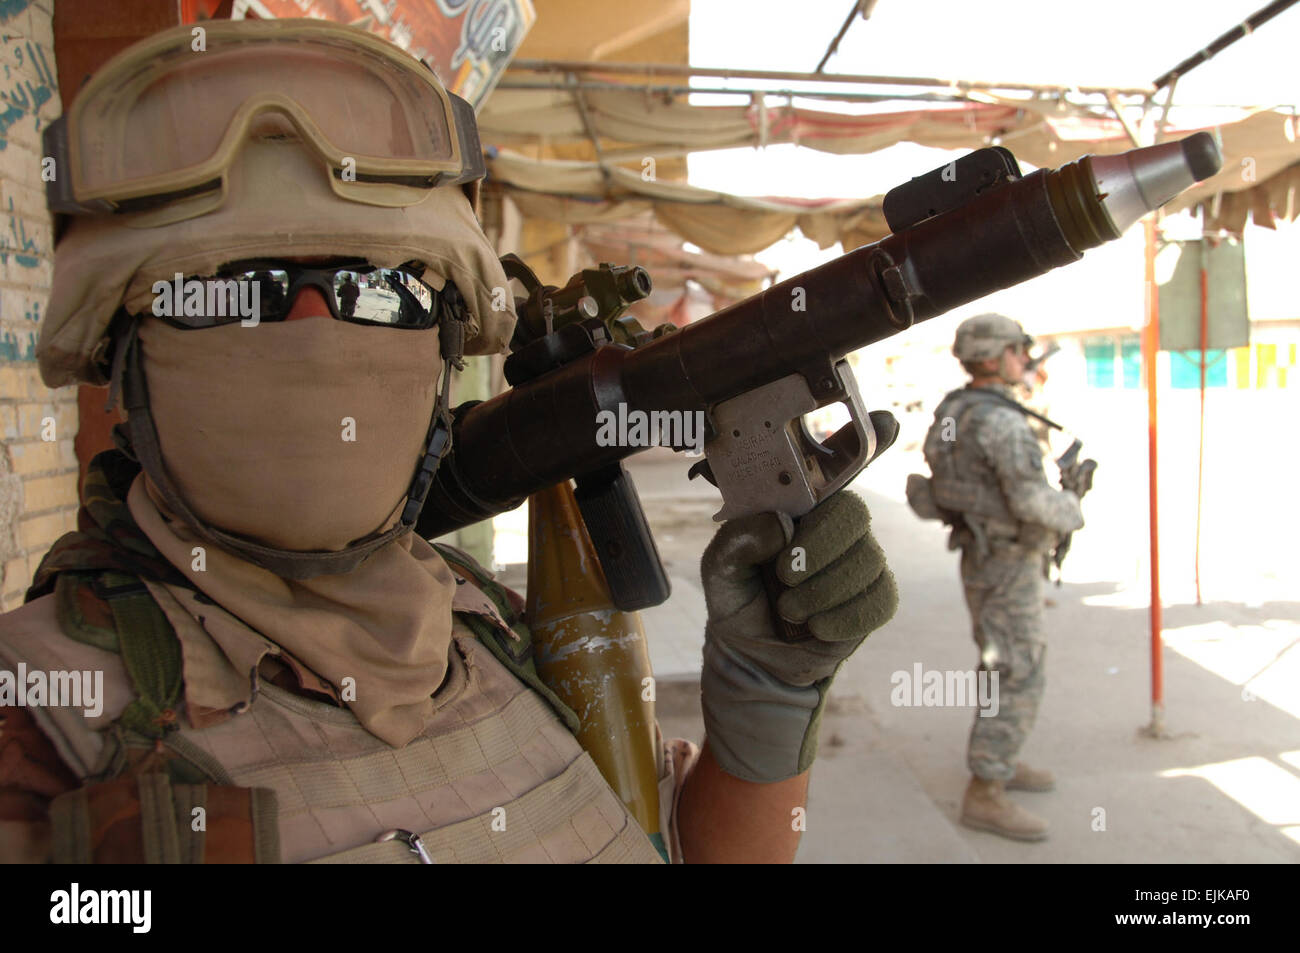 An Iraqi army soldier poses for a picture with his weapon during a mission in Mahmudiyah, Iraq, March 30, 2008.  Spc. Richard Del Vecchio Released Stock Photo